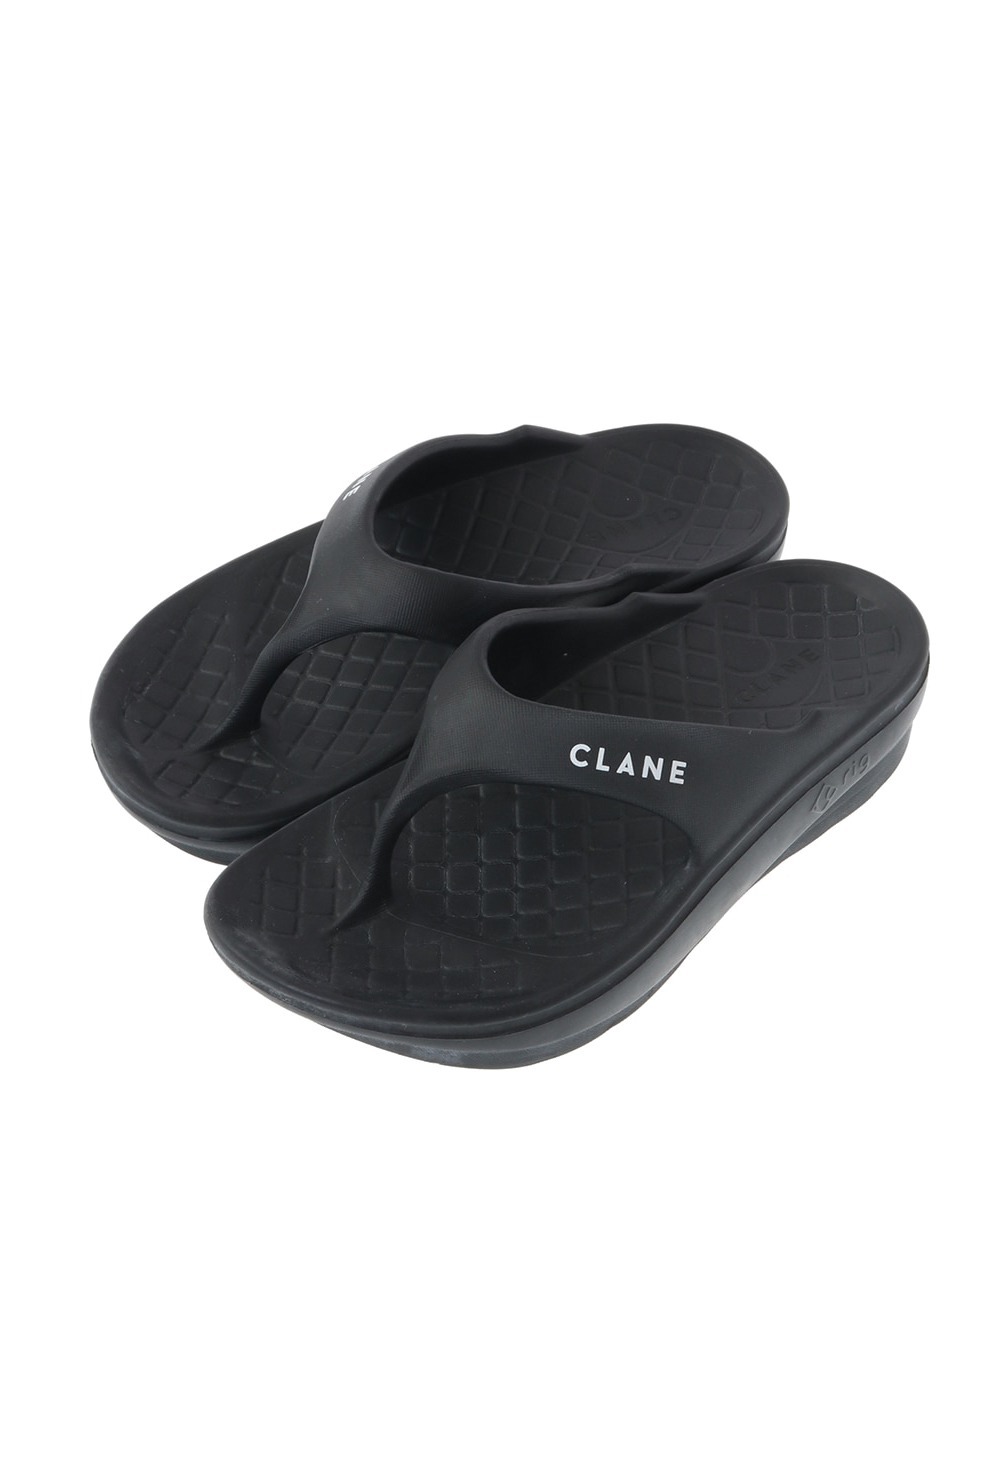 CLANE × rig flipflop 2.0｜BAG/SHOES(バッグ/シューズ)｜CLANE OFFICIAL ONLINE STORE